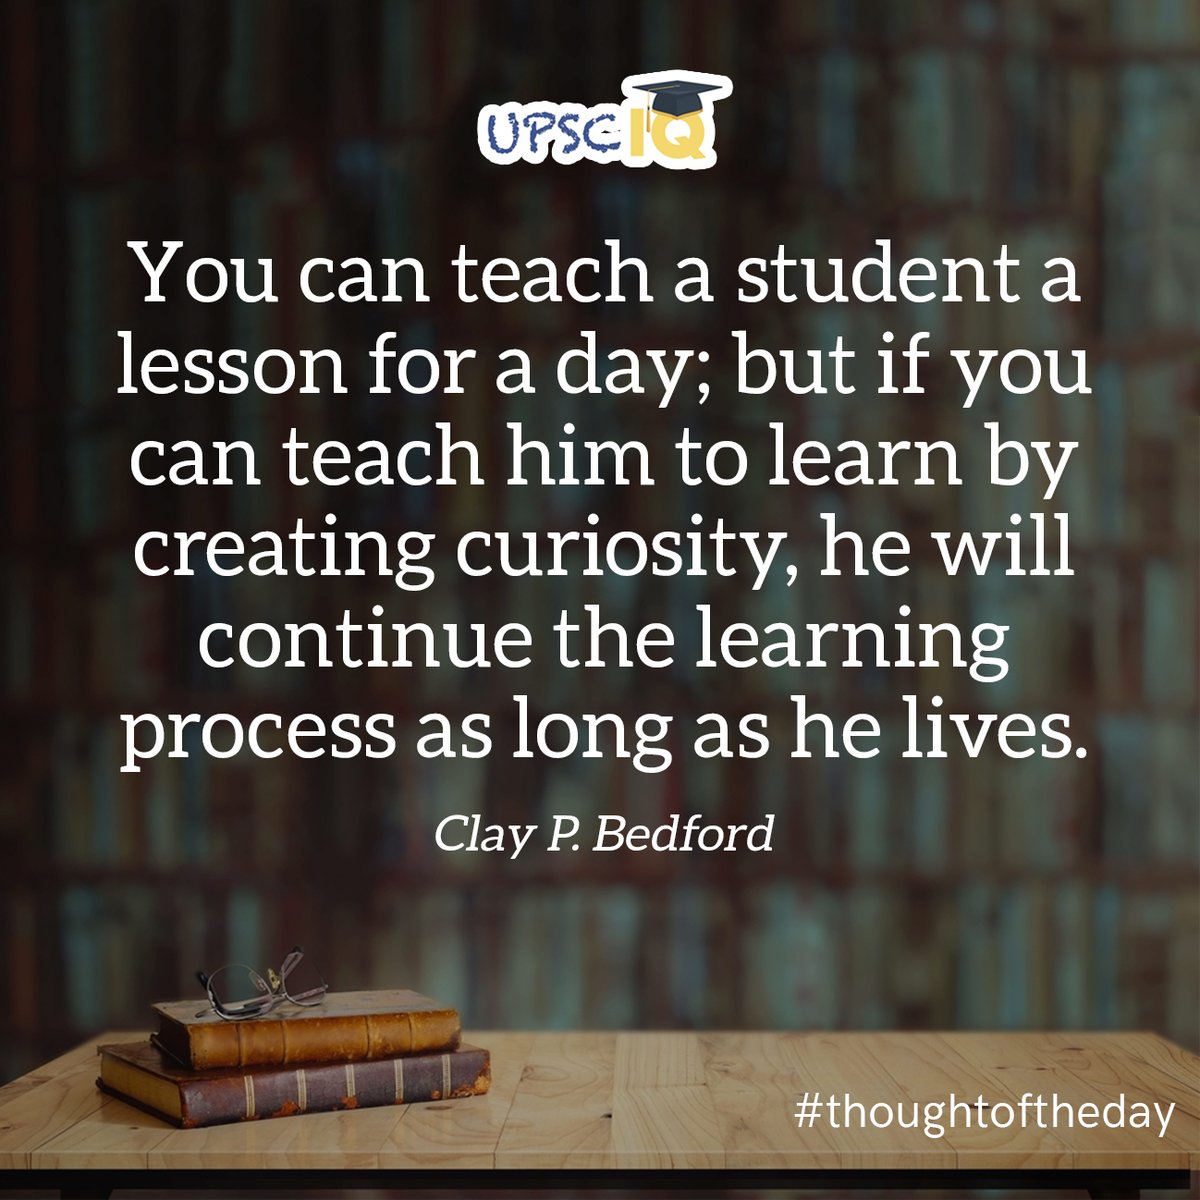 #teachastudent #lesson #learn #creatingcuriosity #learningprocess #lives #claypbedford #thoughtoftheday #Motivationalquote #dailymotivation #quotes #quoteoftheday #todaythought #quotesaboutlife #quoteofthelife #dailyquotes #dailythoughts #motivationquotes